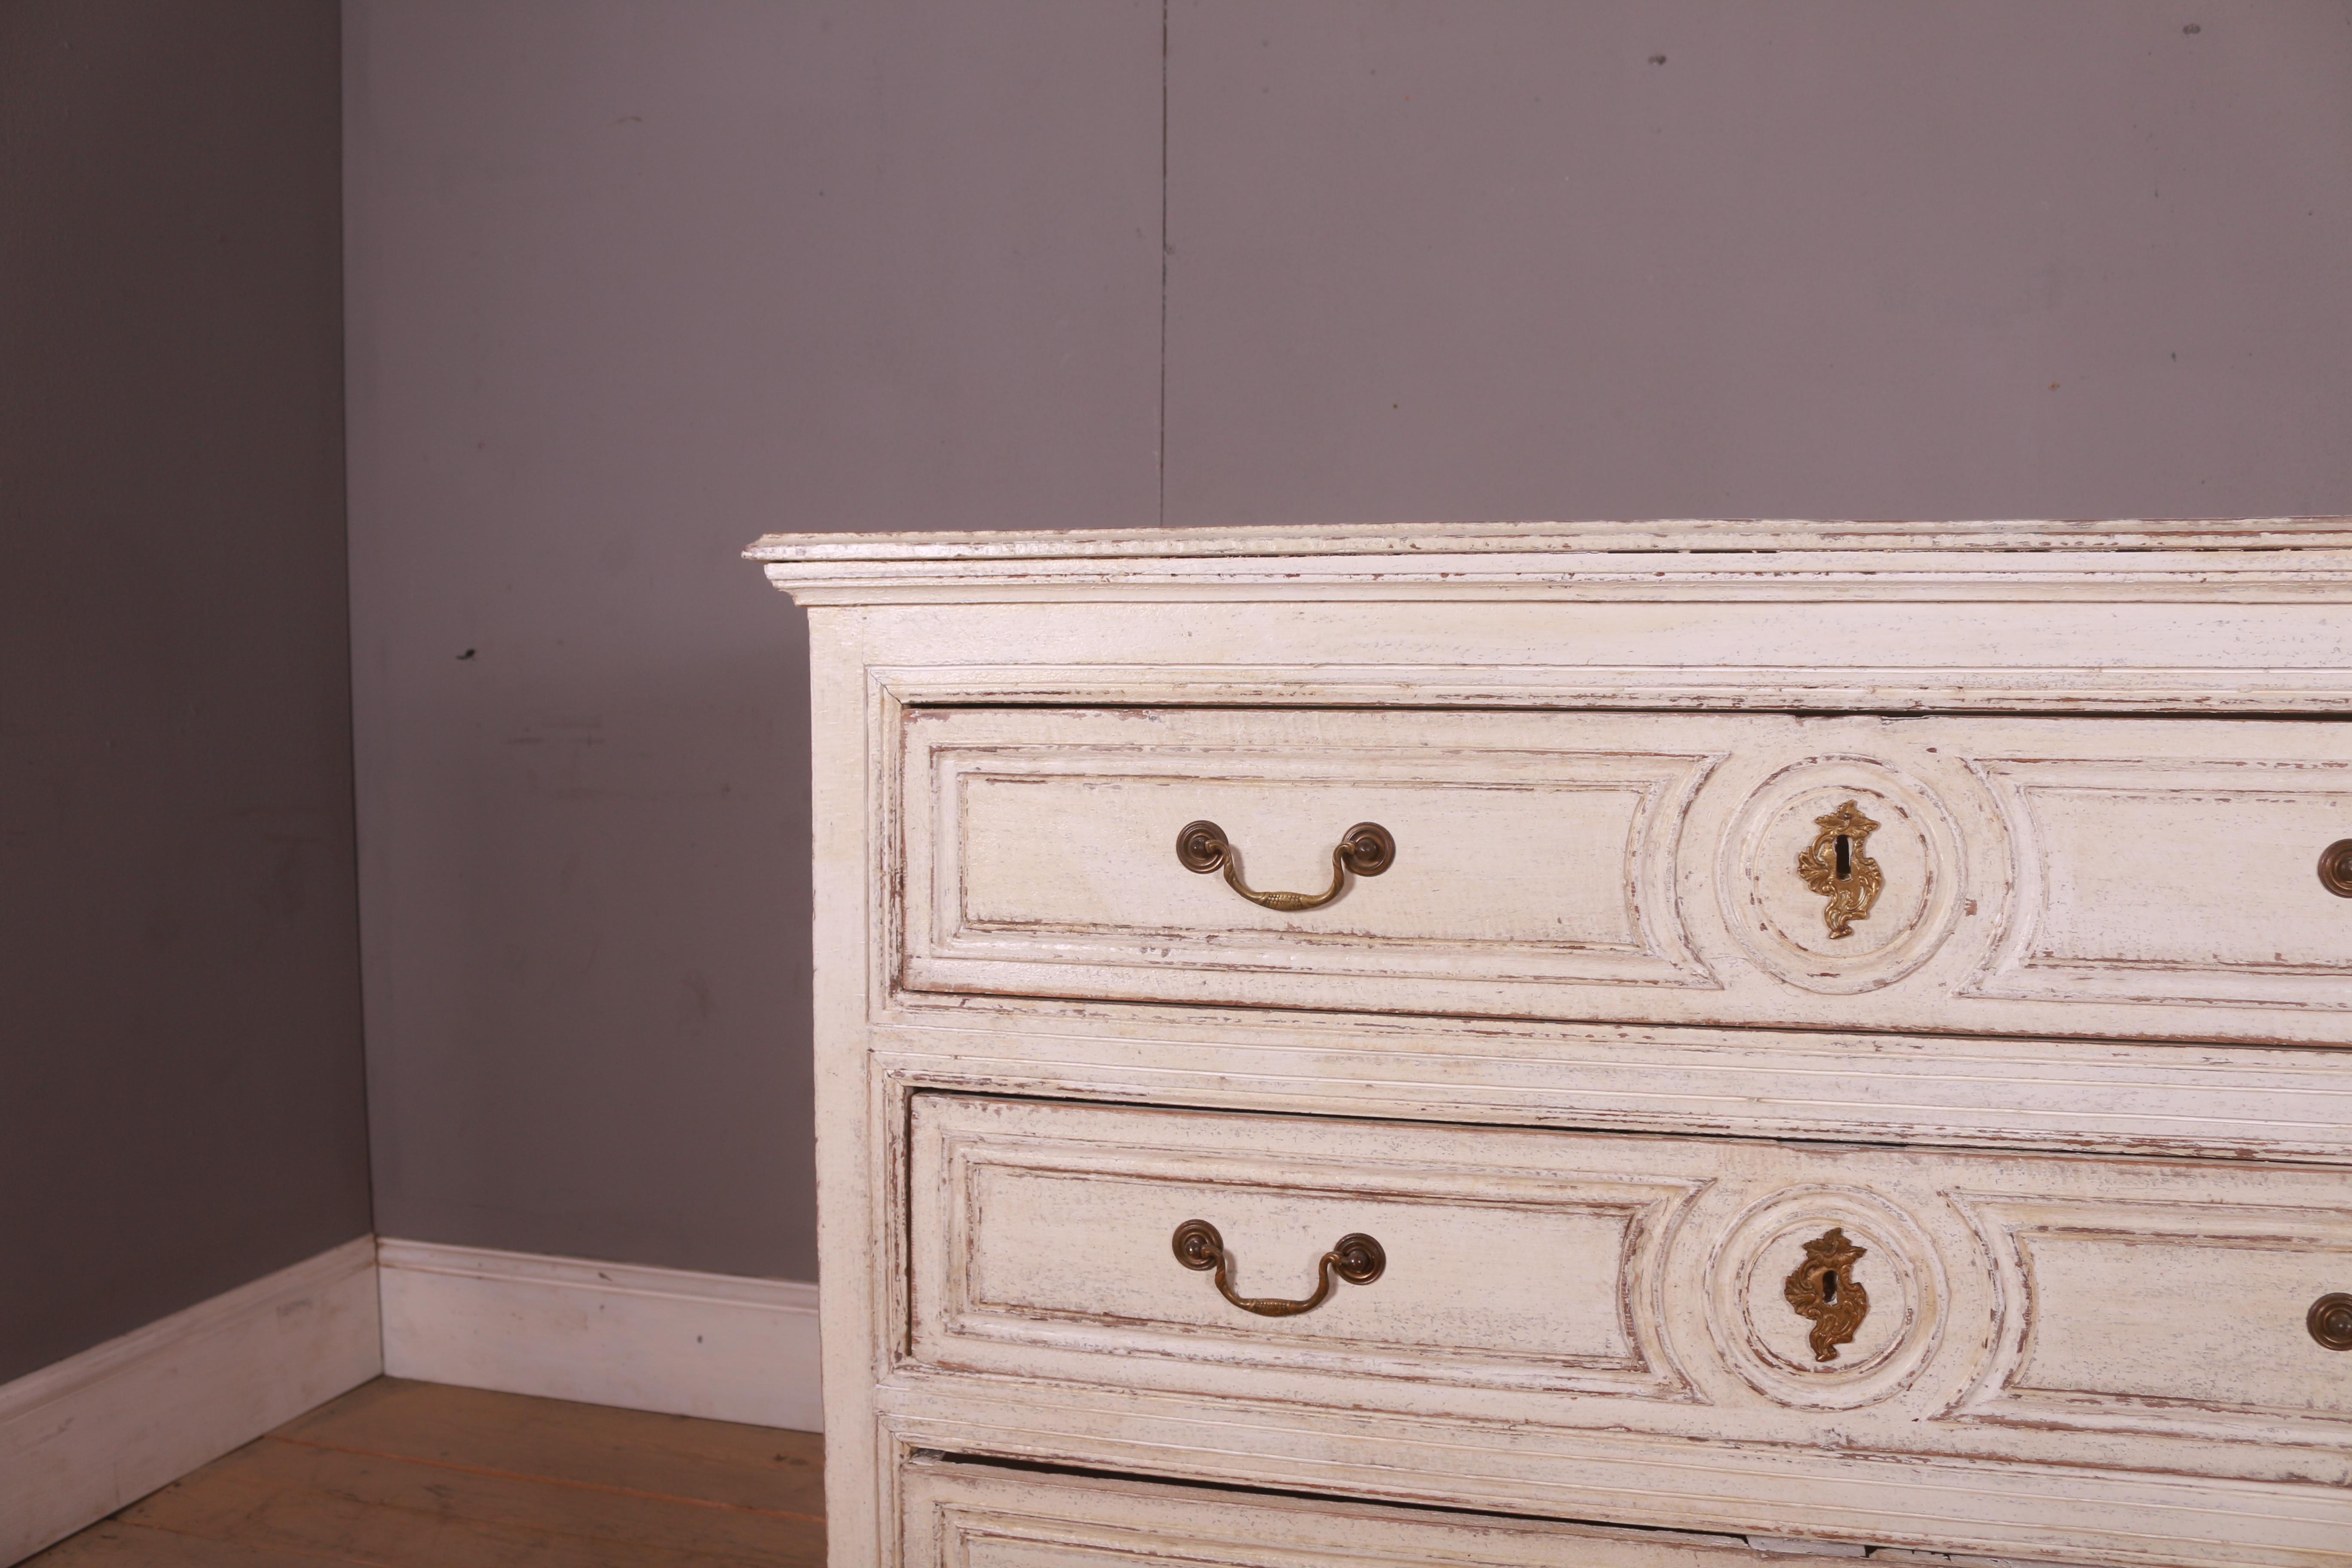 A Belgian oak commode from circa 1820 with cream/off white painted finish, three drawers and Rococo style escutcheons.  This Belgian oak commode, dating back to circa 1820, is a splendid representation of timeless elegance and functionality. The